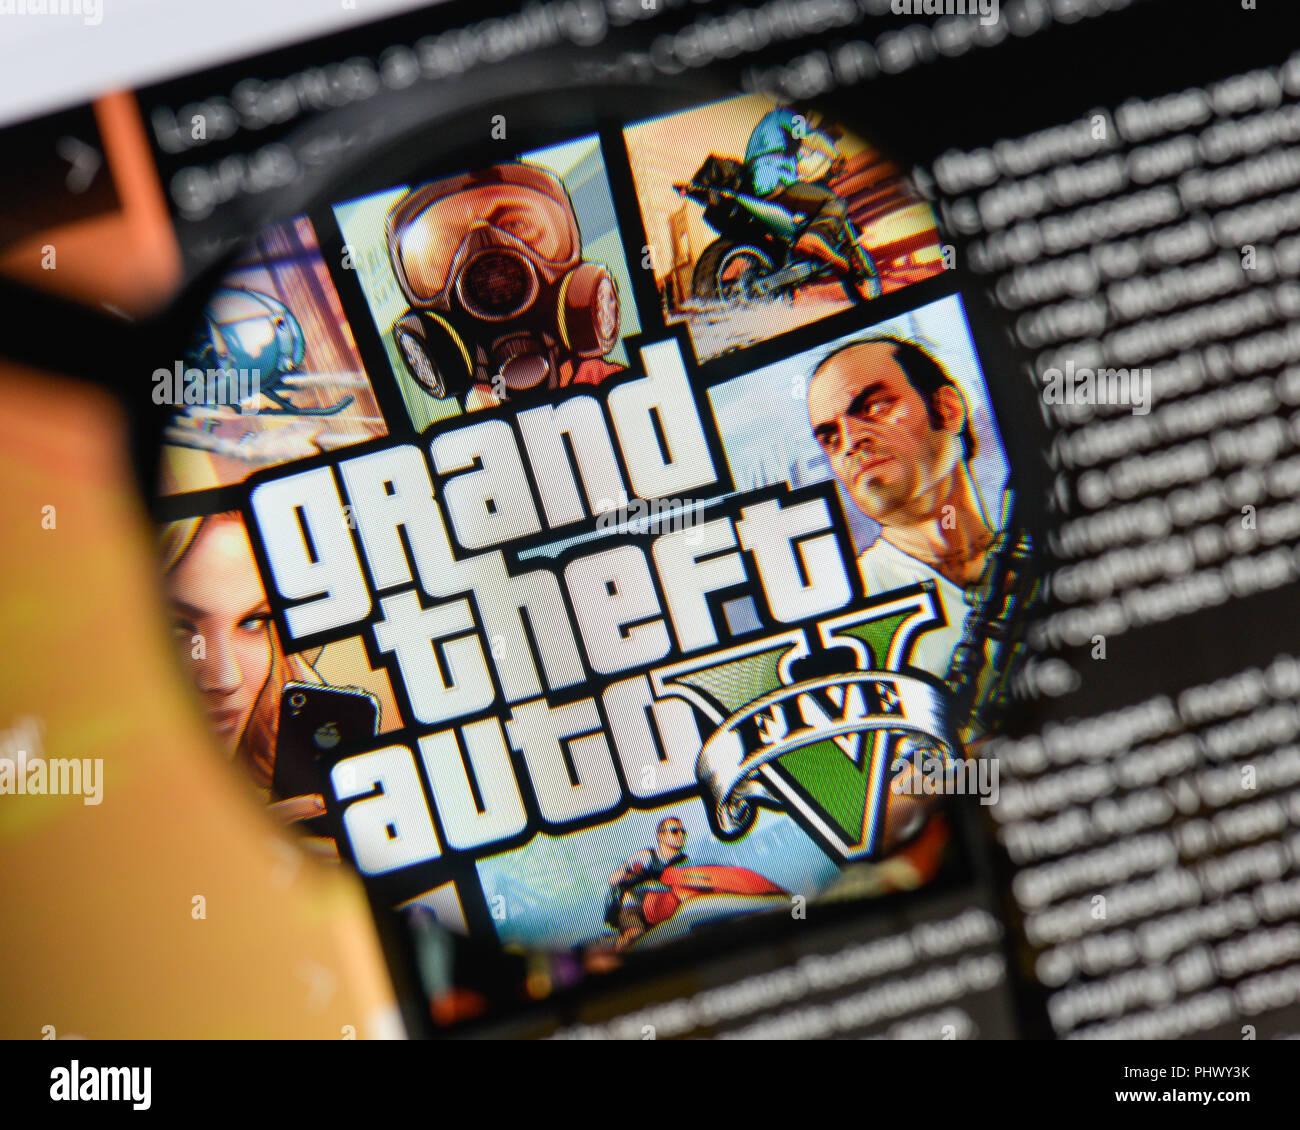 Gta Stock Photos and Pictures - 2,859 Images